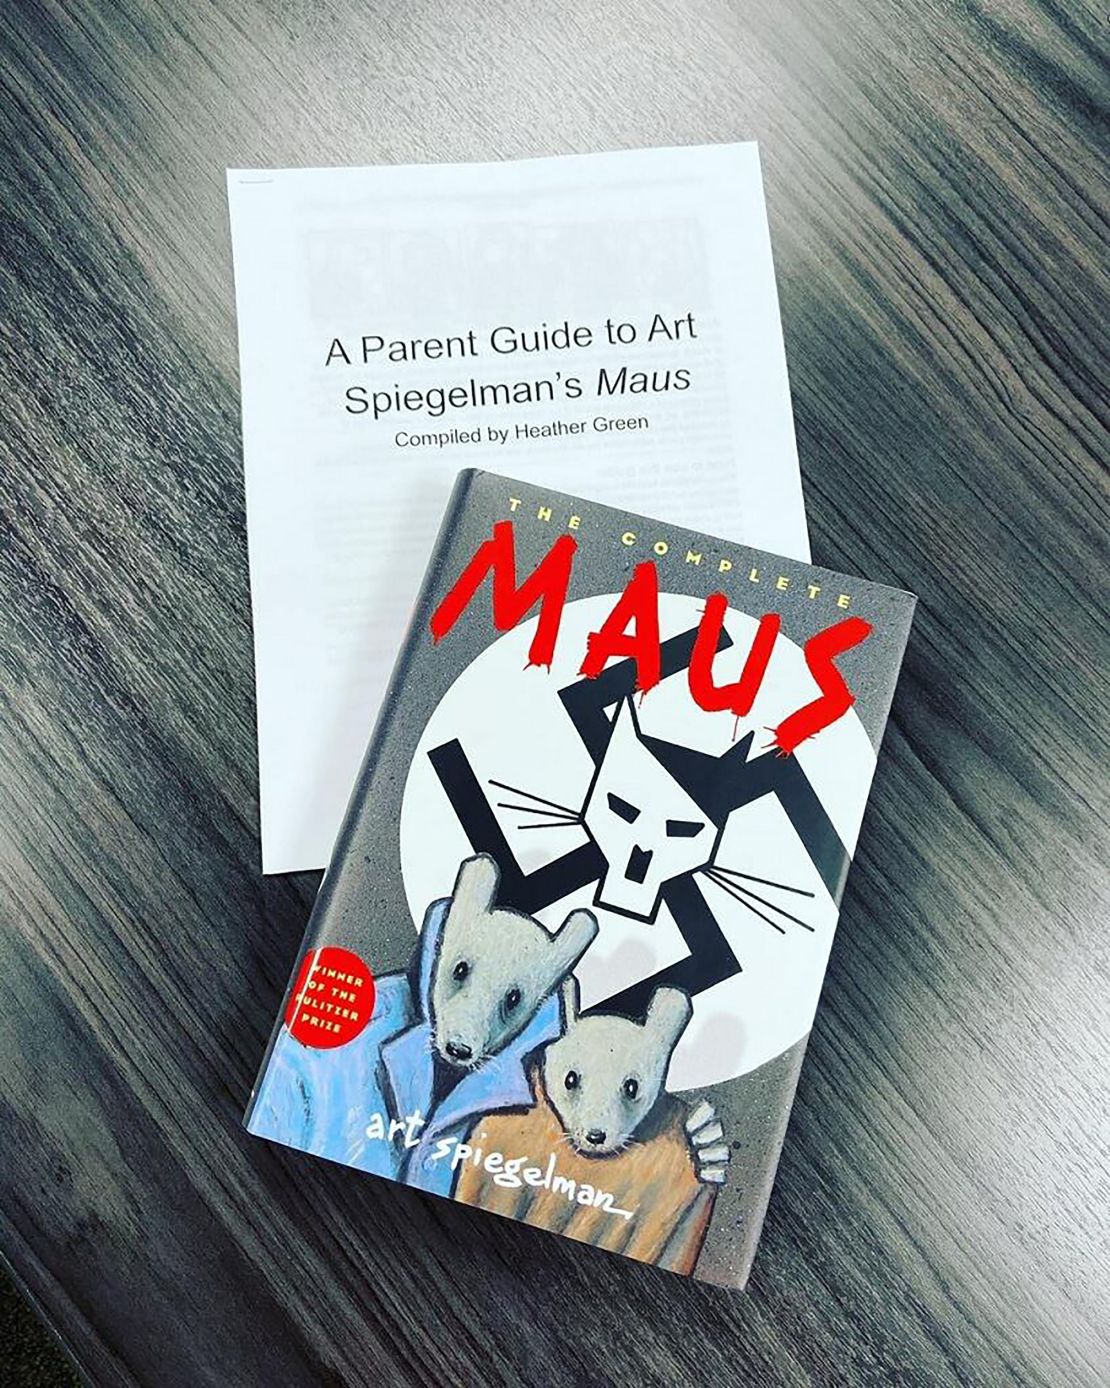 Nirvana Comics in Knoxville includes at 10-page study guide with each copy of "Maus".